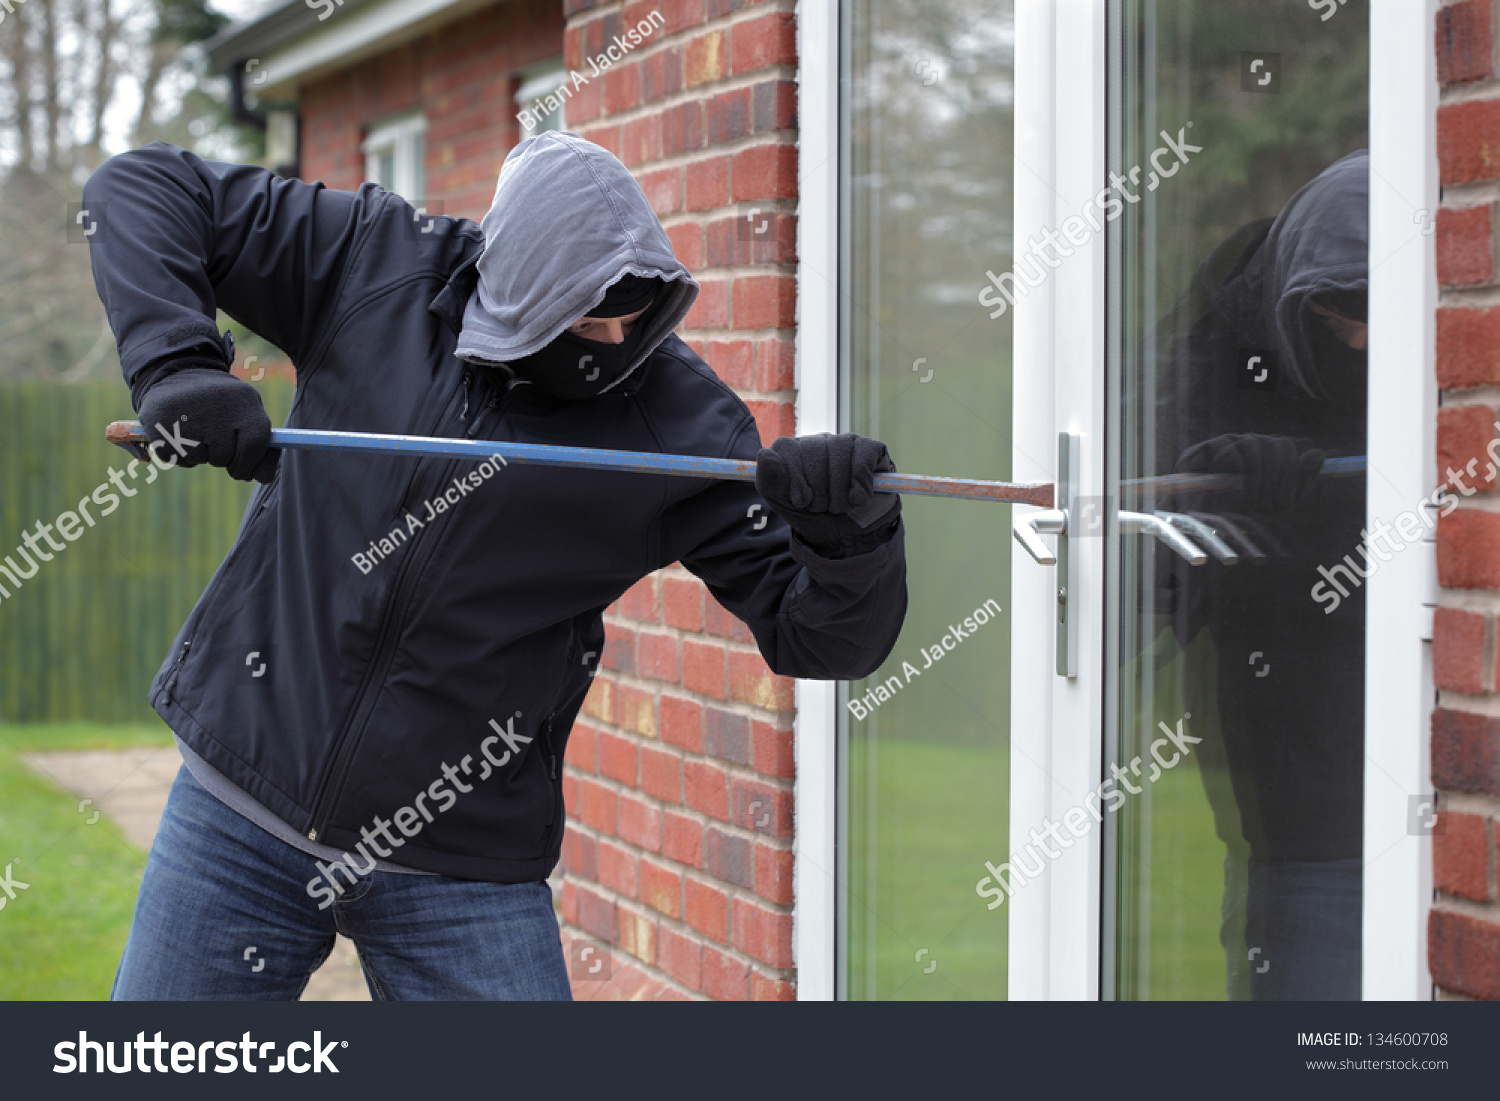 Burglar Breaking Into A House Window With A Crowbar Stock